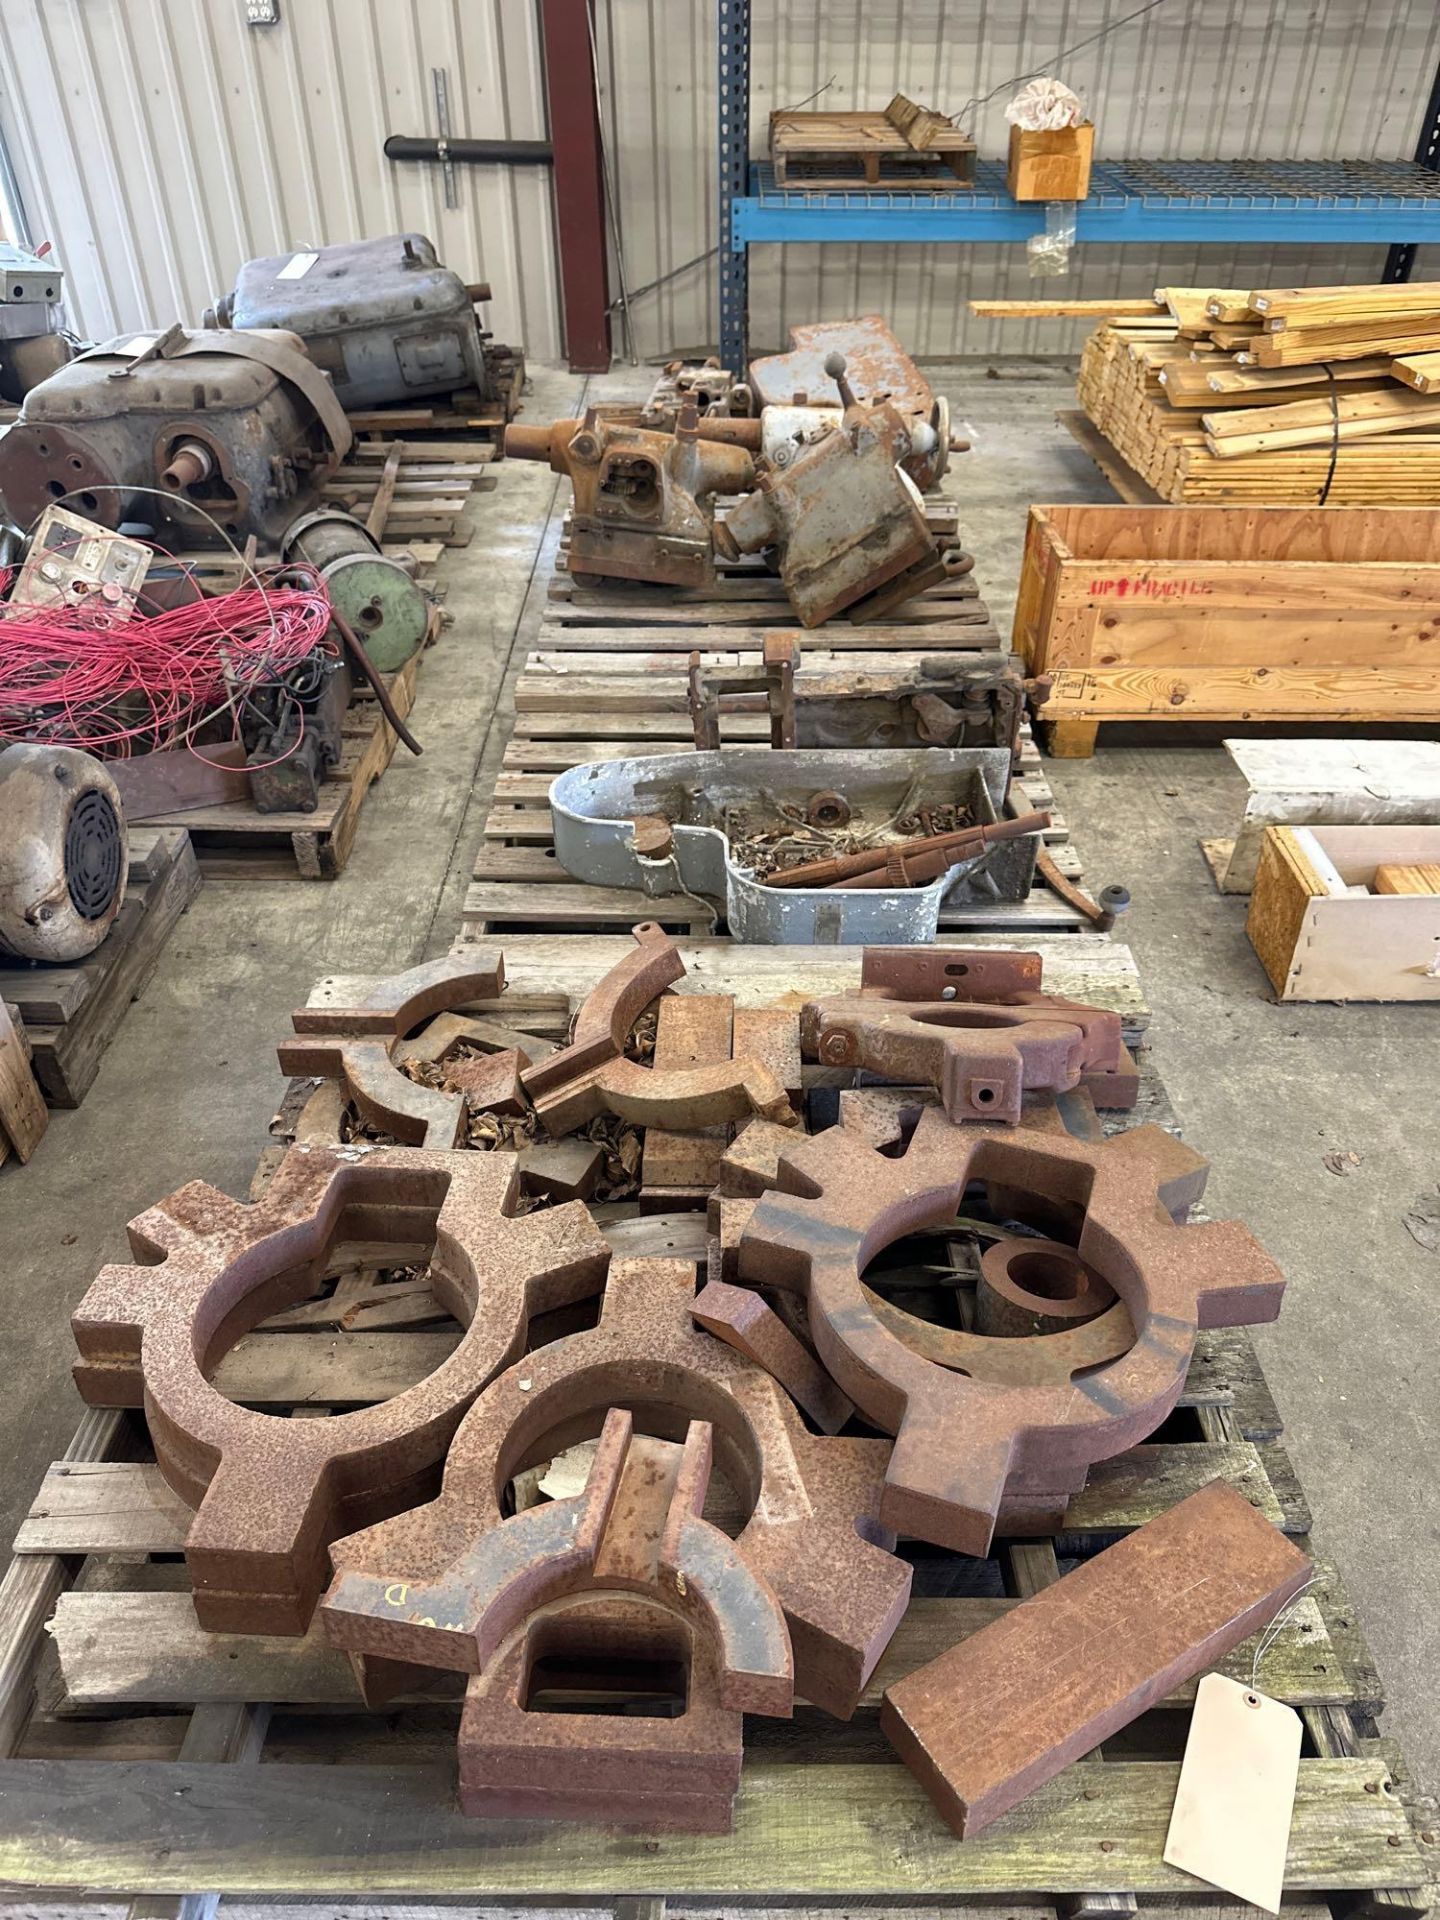 Lot of 14 Pallets of Axelson Parts: Motors, Gear Boxes, Steady Rests, Tail Stocks, Electrical Cabine - Image 24 of 31